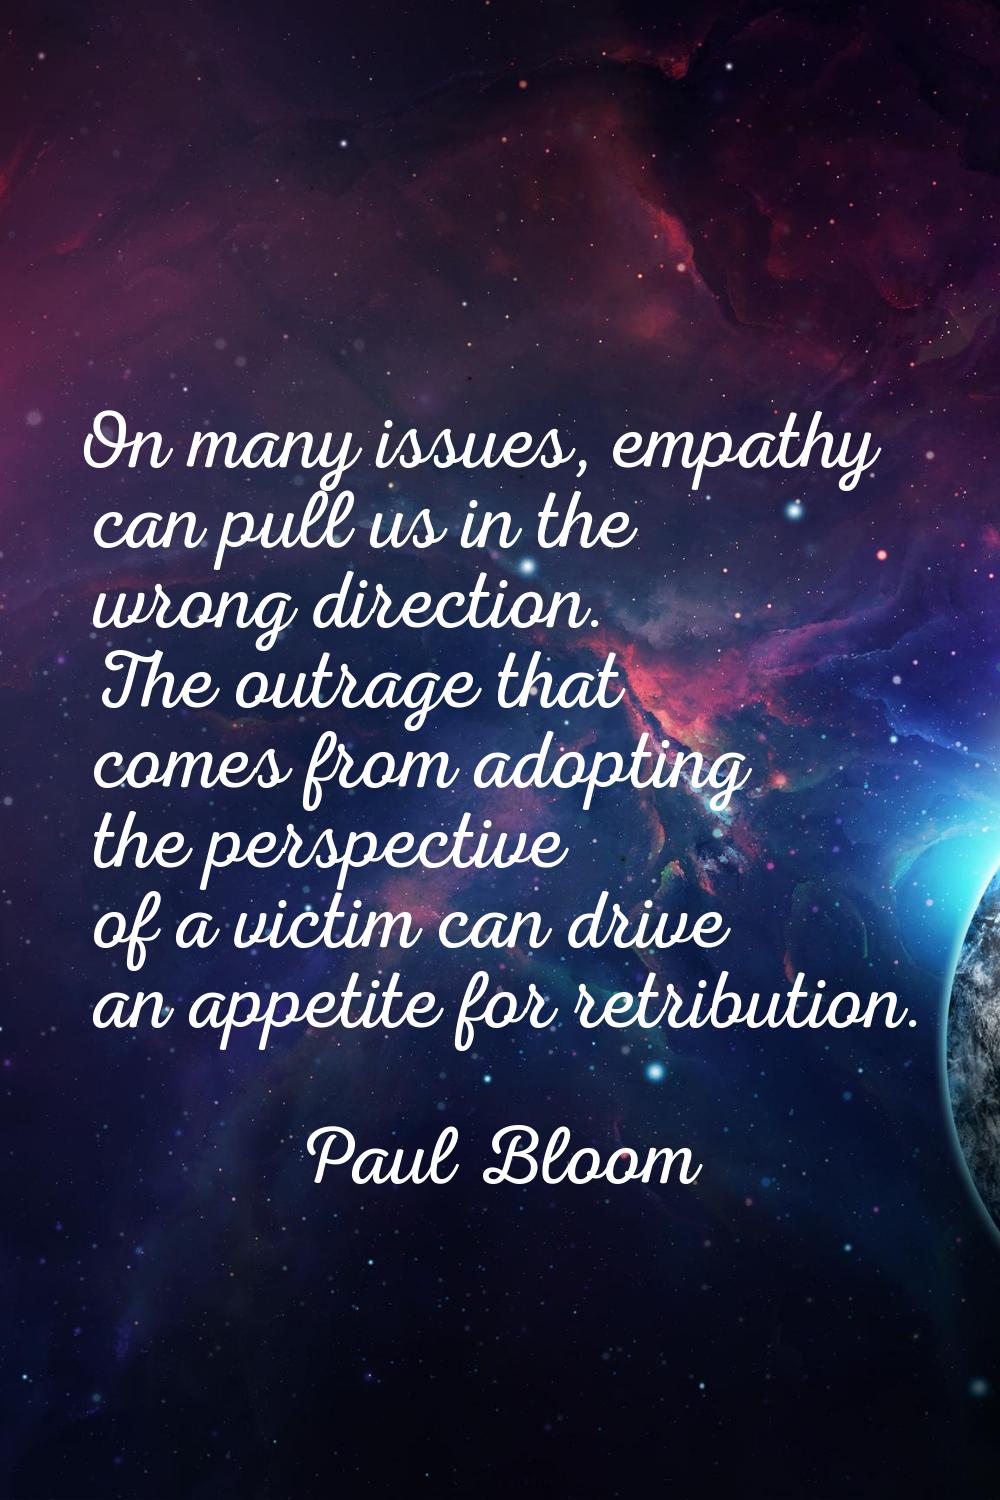 On many issues, empathy can pull us in the wrong direction. The outrage that comes from adopting th